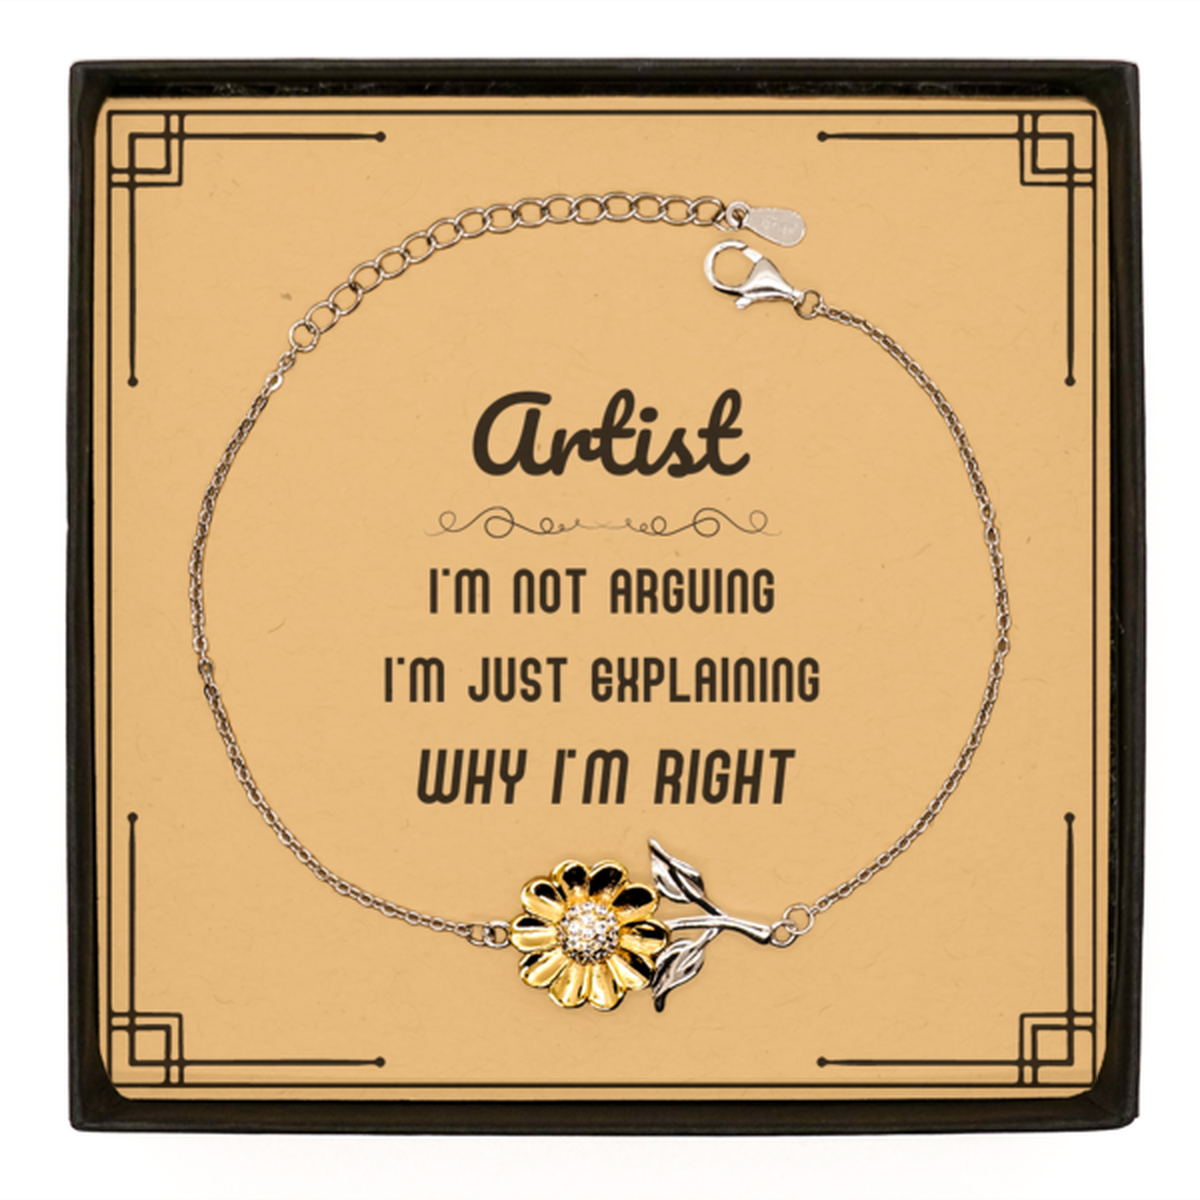 Artist I'm not Arguing. I'm Just Explaining Why I'm RIGHT Sunflower Bracelet, Funny Saying Quote Artist Gifts For Artist Message Card Graduation Birthday Christmas Gifts for Men Women Coworker